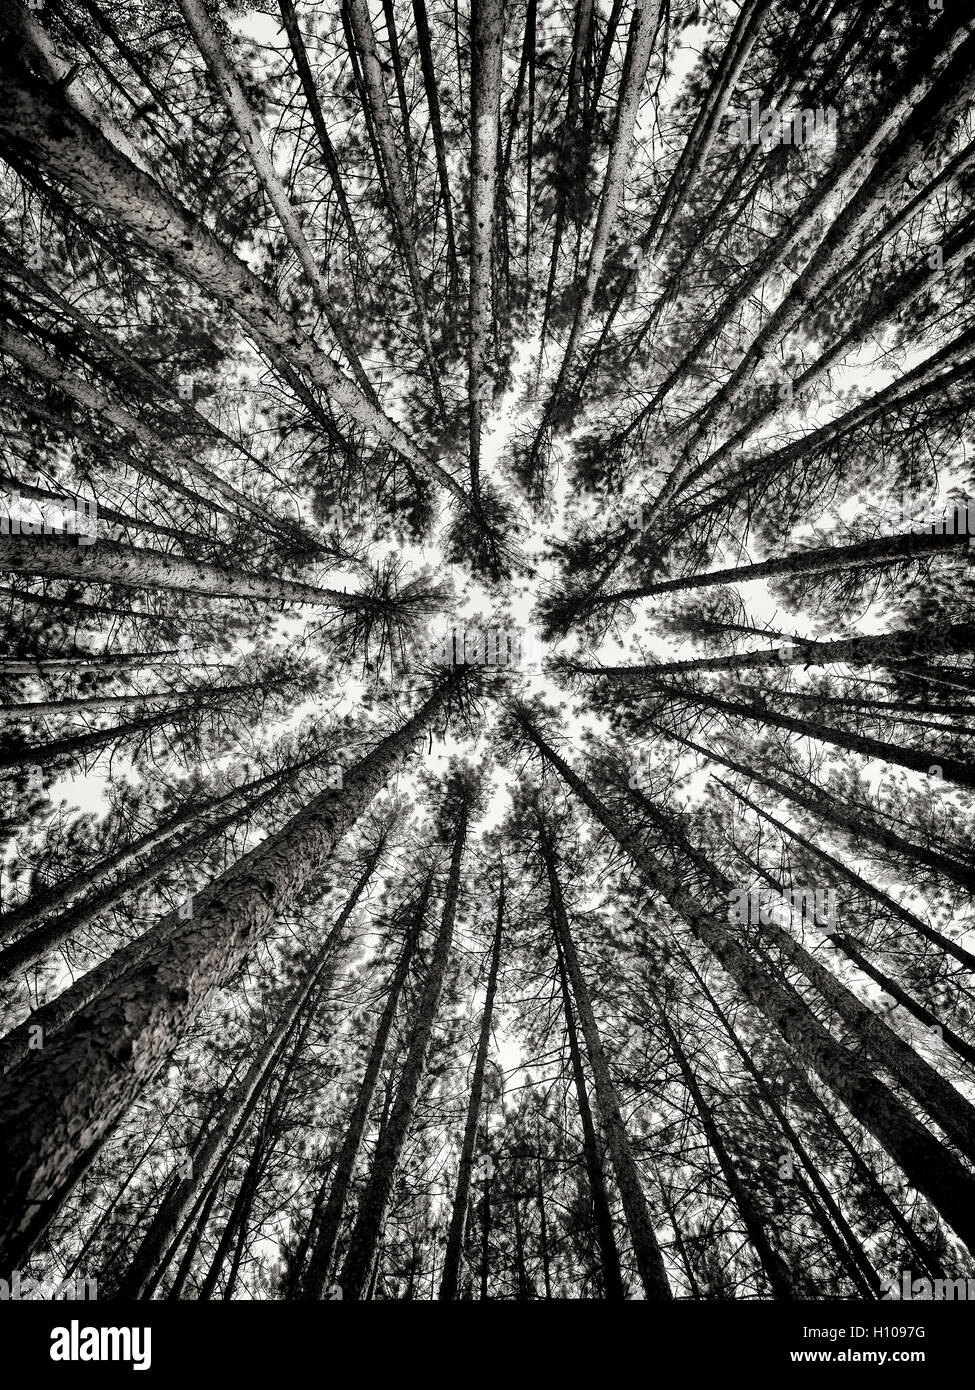 Artistic abstract image of tall pine forest tree tops over blue sky, Muskoka, Ontario, Canada, black and white Stock Photo